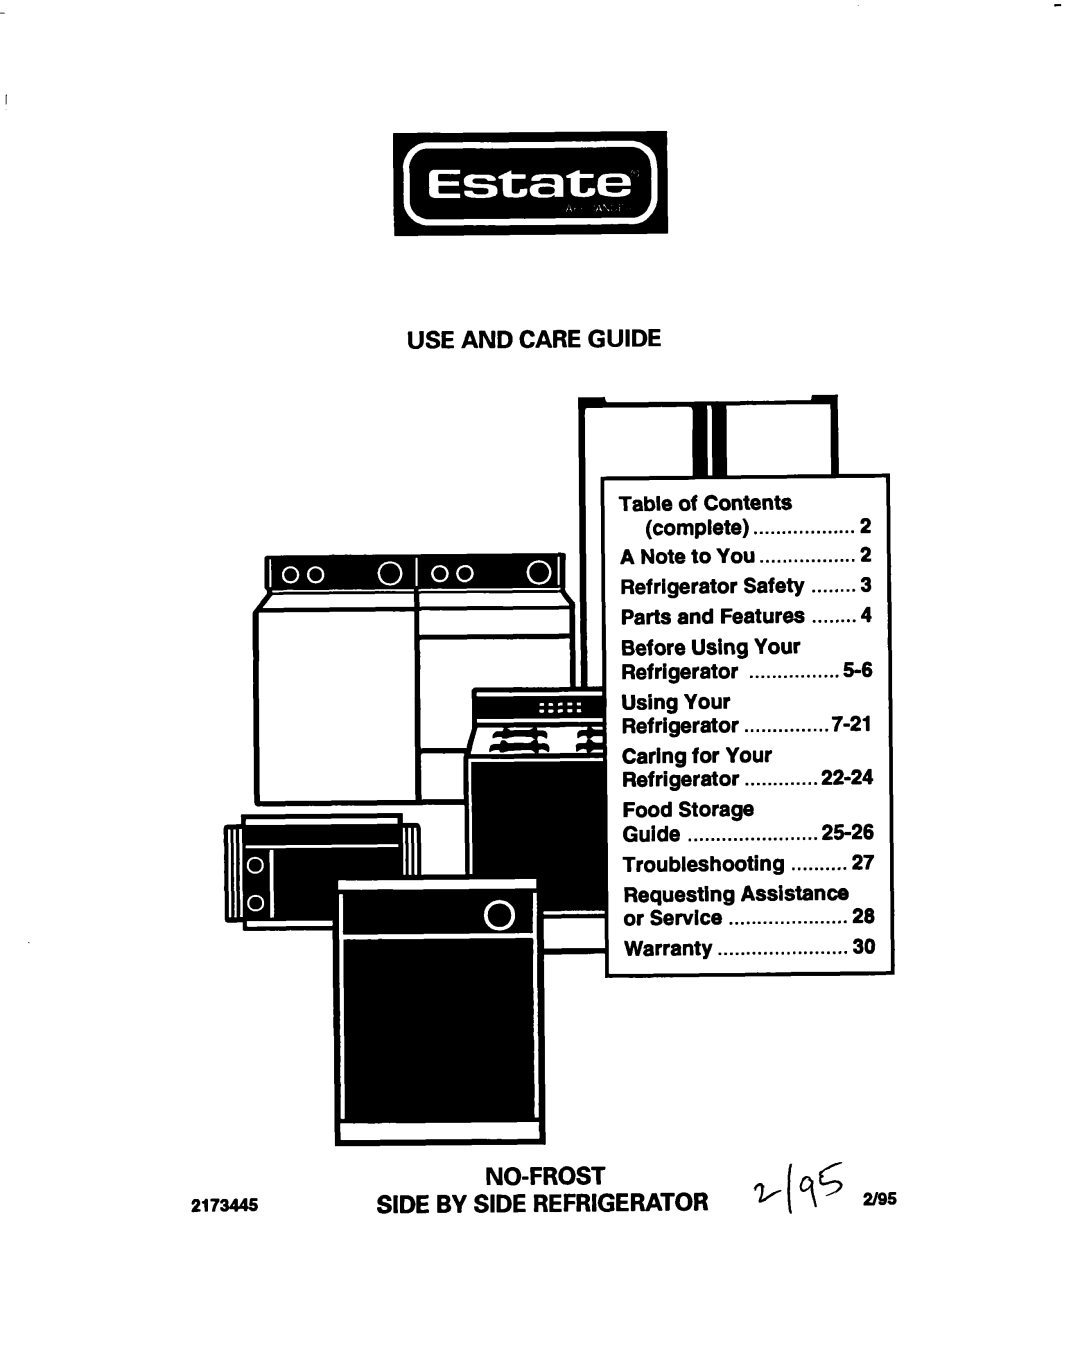 Estate 2173445 warranty Use And Care Guide, Using Your Refrigerator, Food Storage, Requesting Assistance, No-Frost 